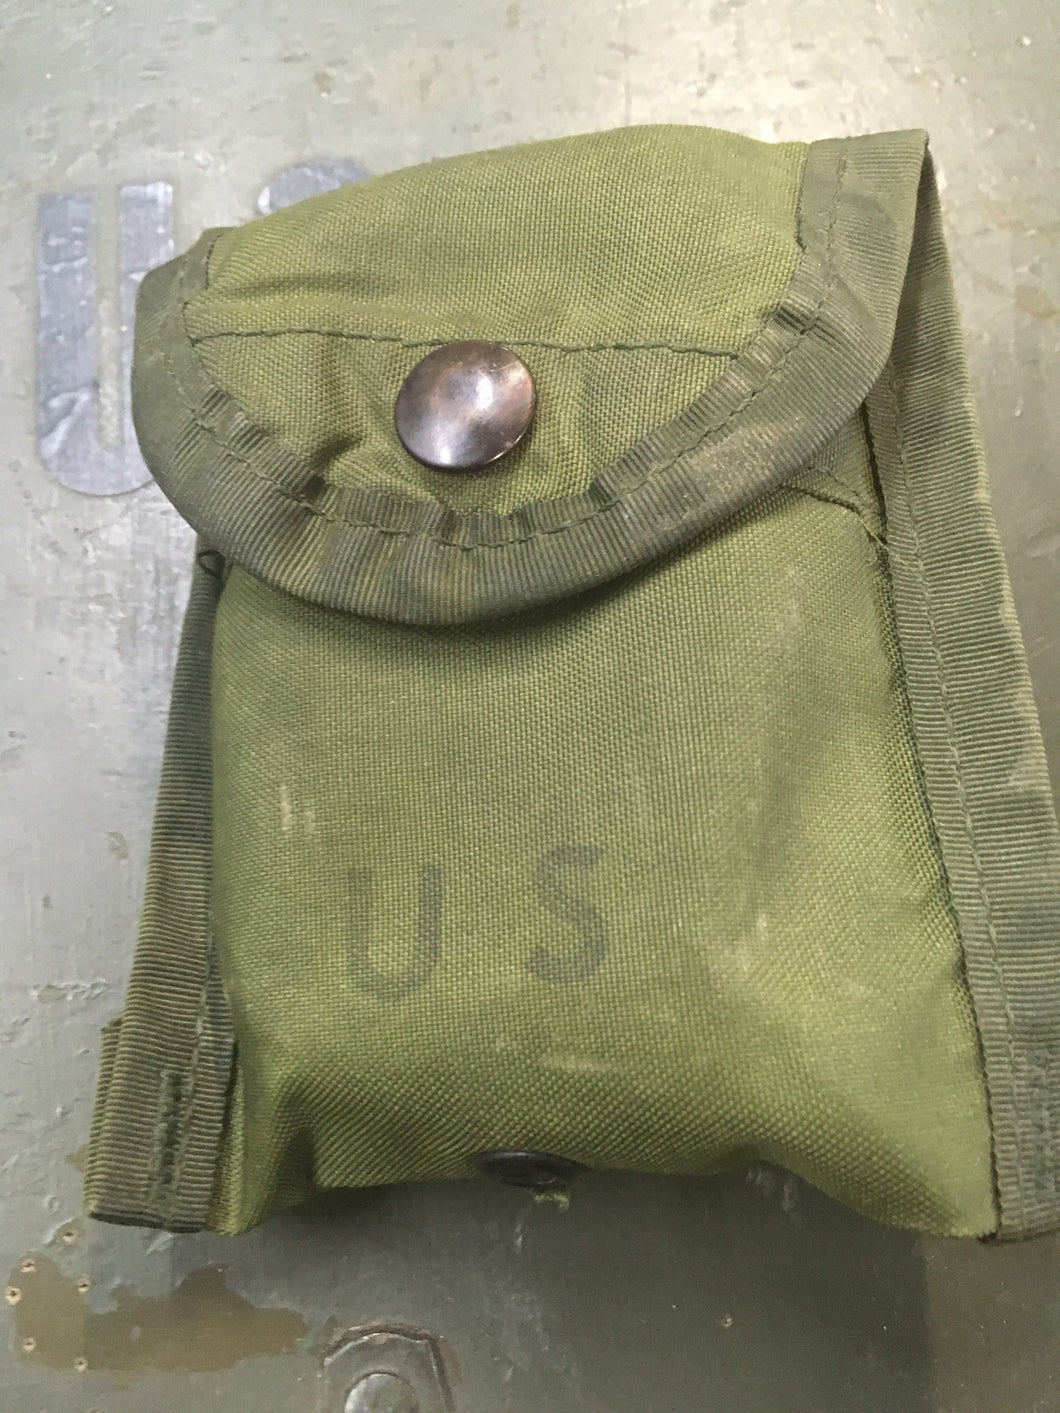 Vintage Early Military First Aid Pouch With Metal First Aid Packet U S Gov't Carlisle Model